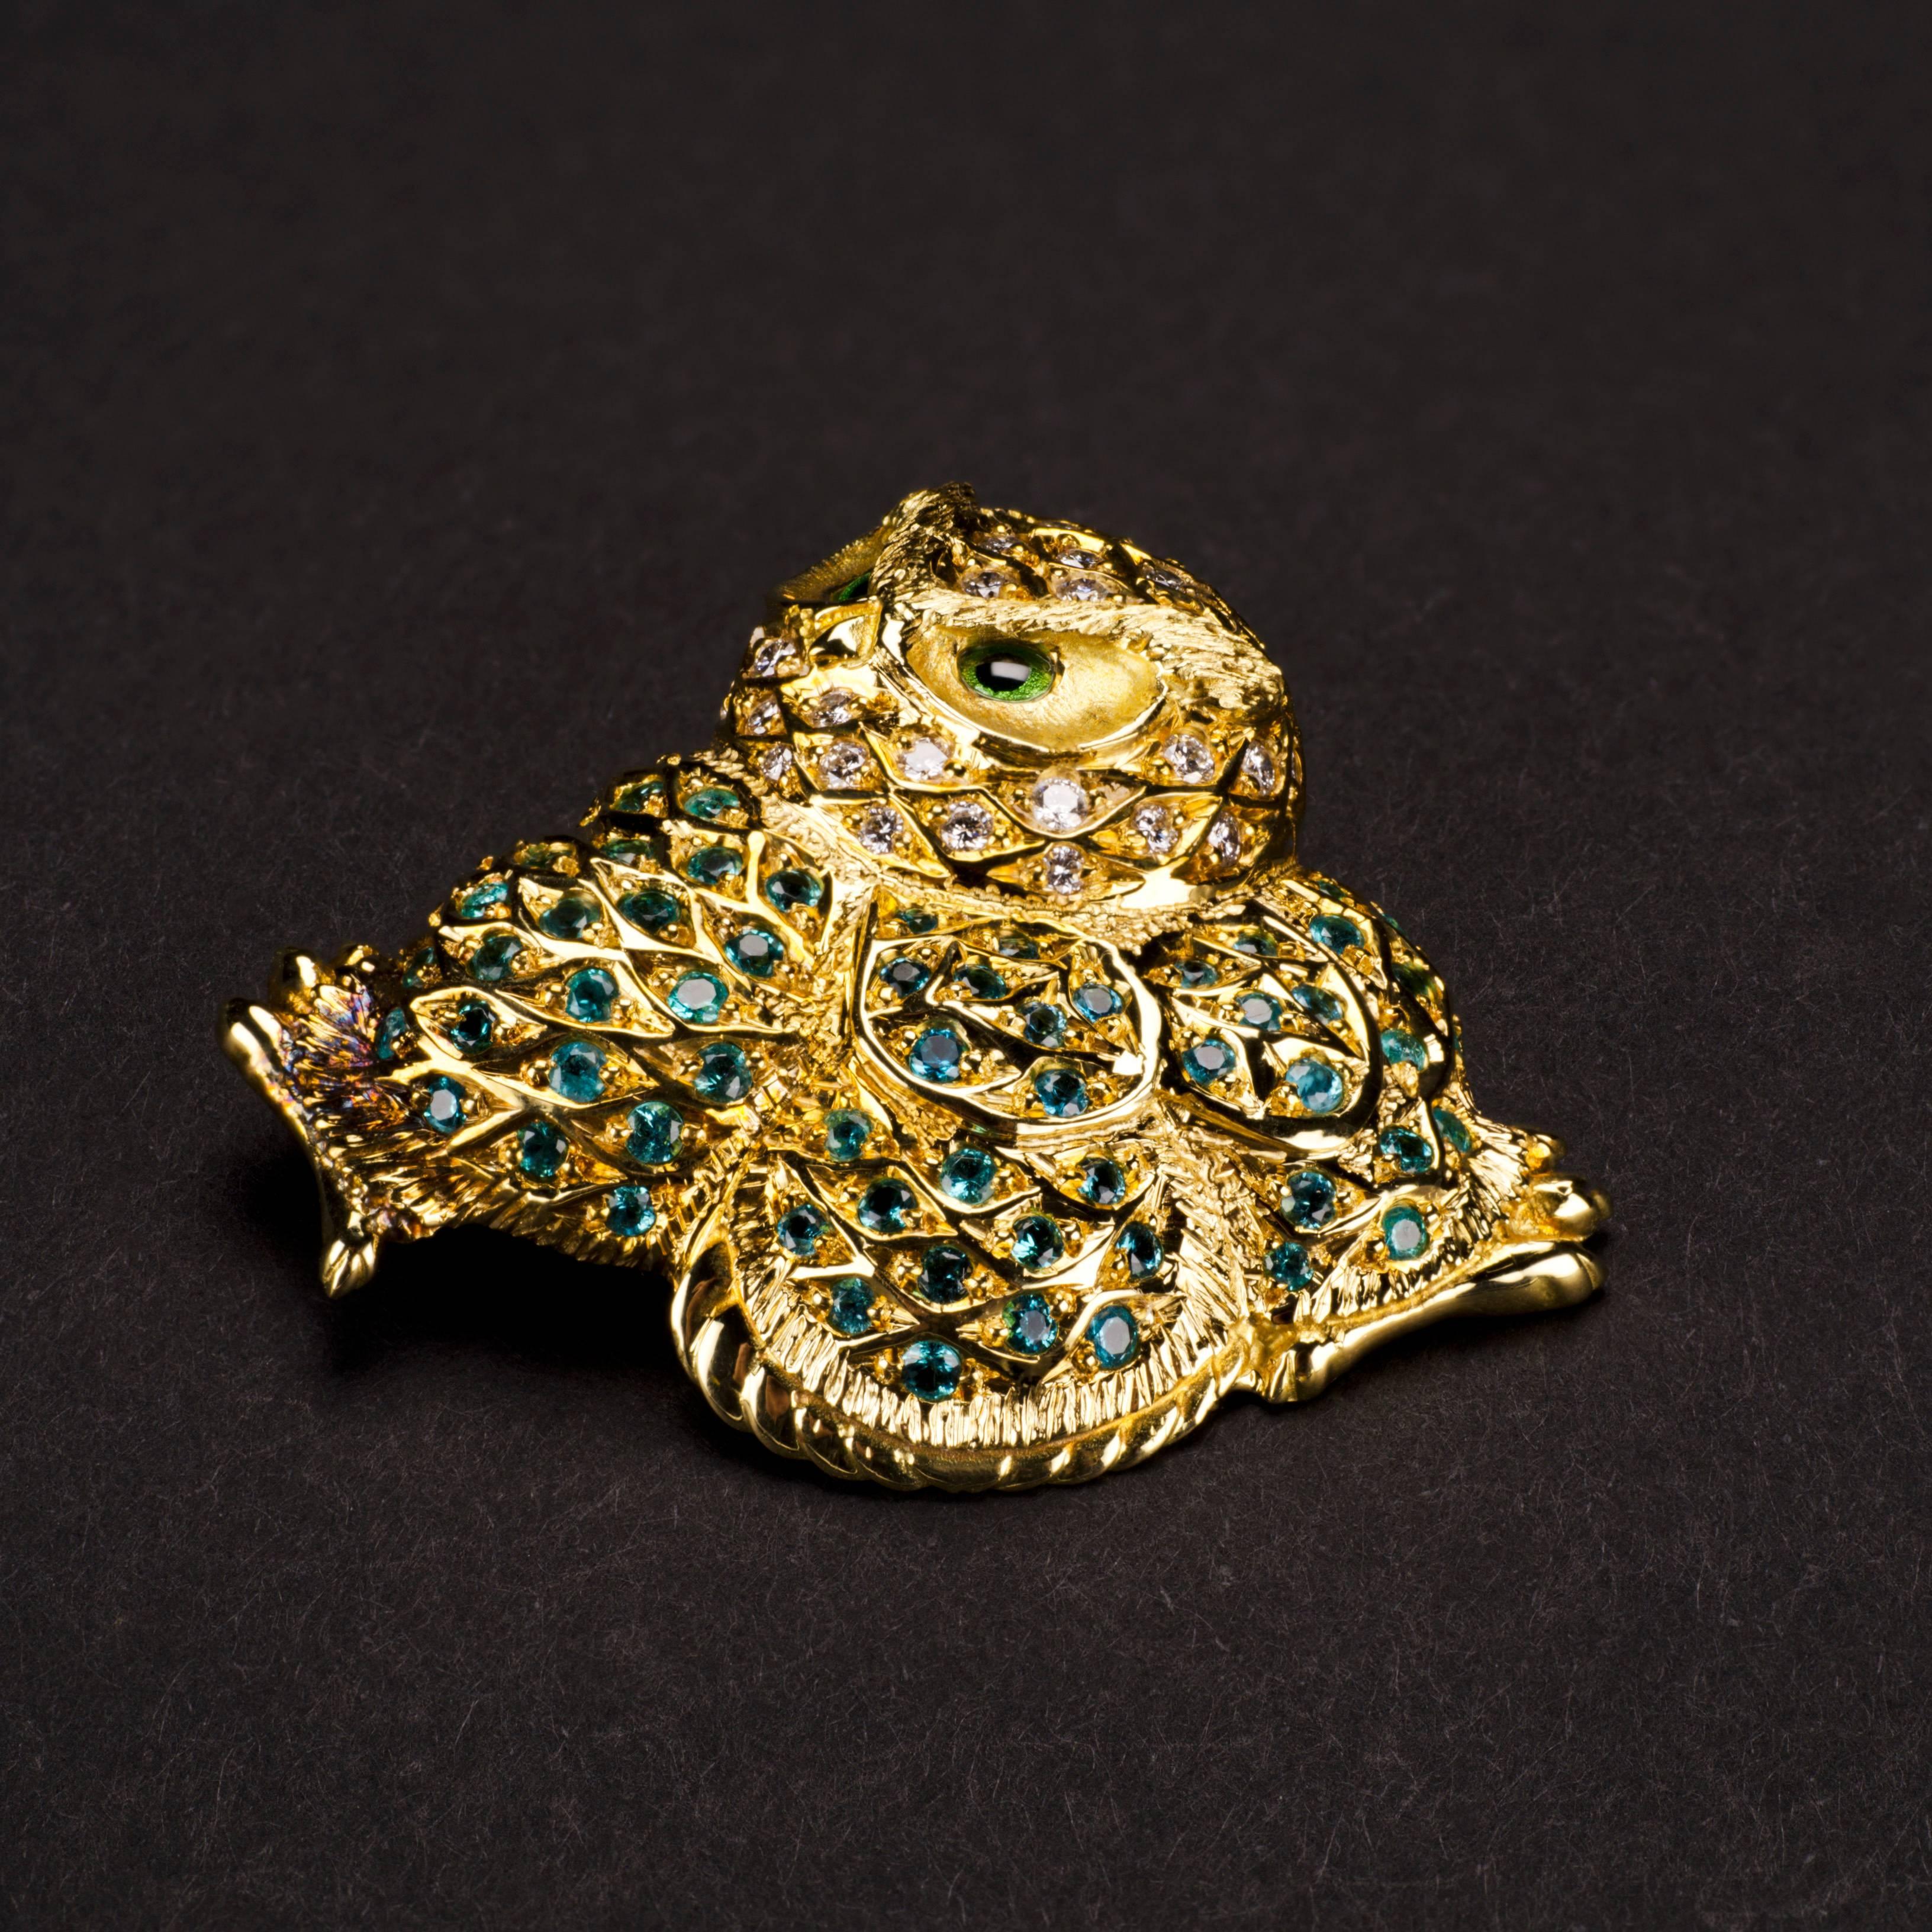 18 Carat Yellow Gold Paraiba Tourmaline and Diamond Owl Brooch In Excellent Condition For Sale In Idar-Oberstein, DE